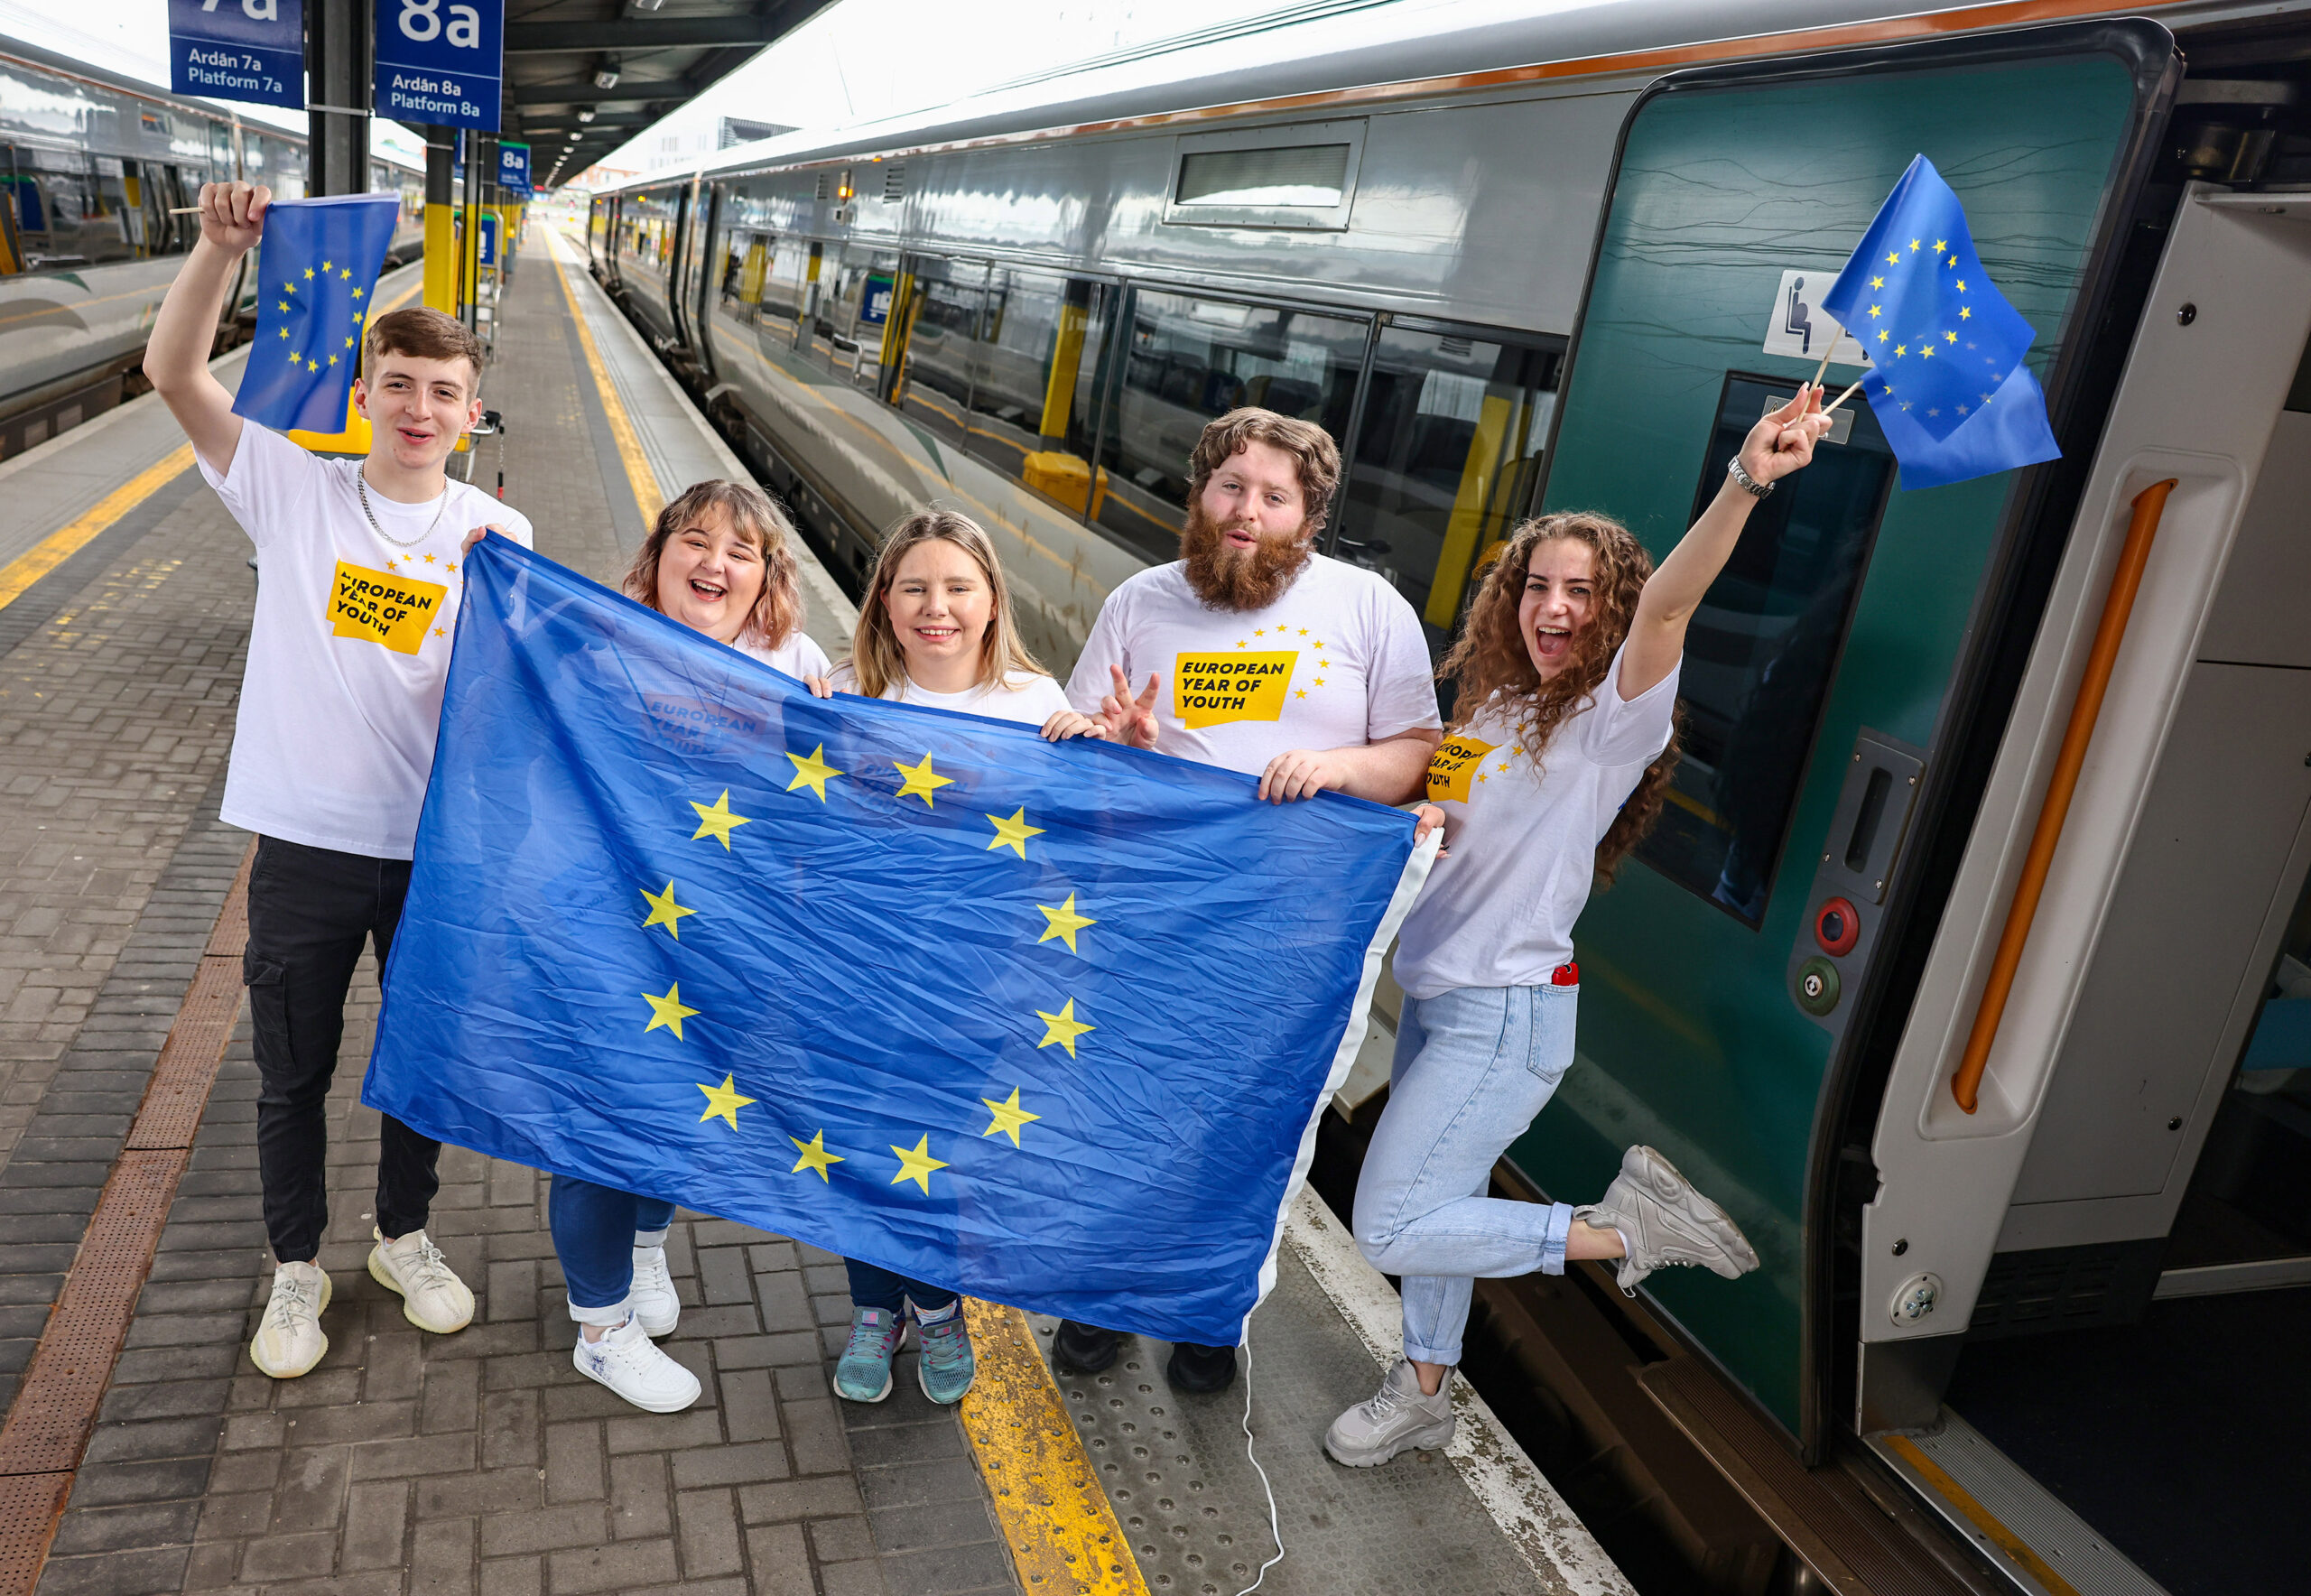 All Aboard! 200 young people on track for European opportunities